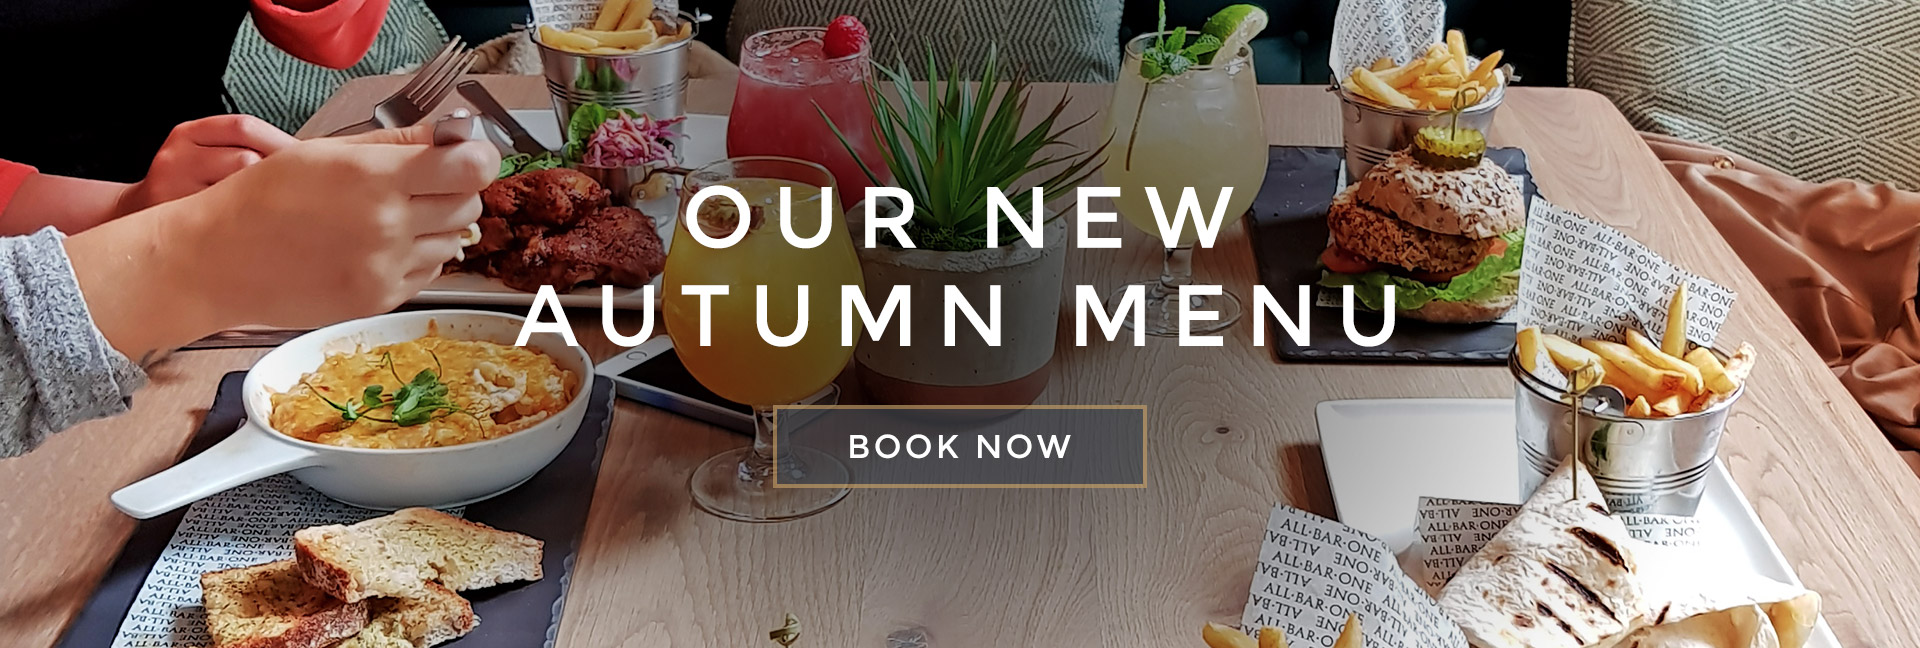 Our new Autumn menu at ABO Virtual - Book now